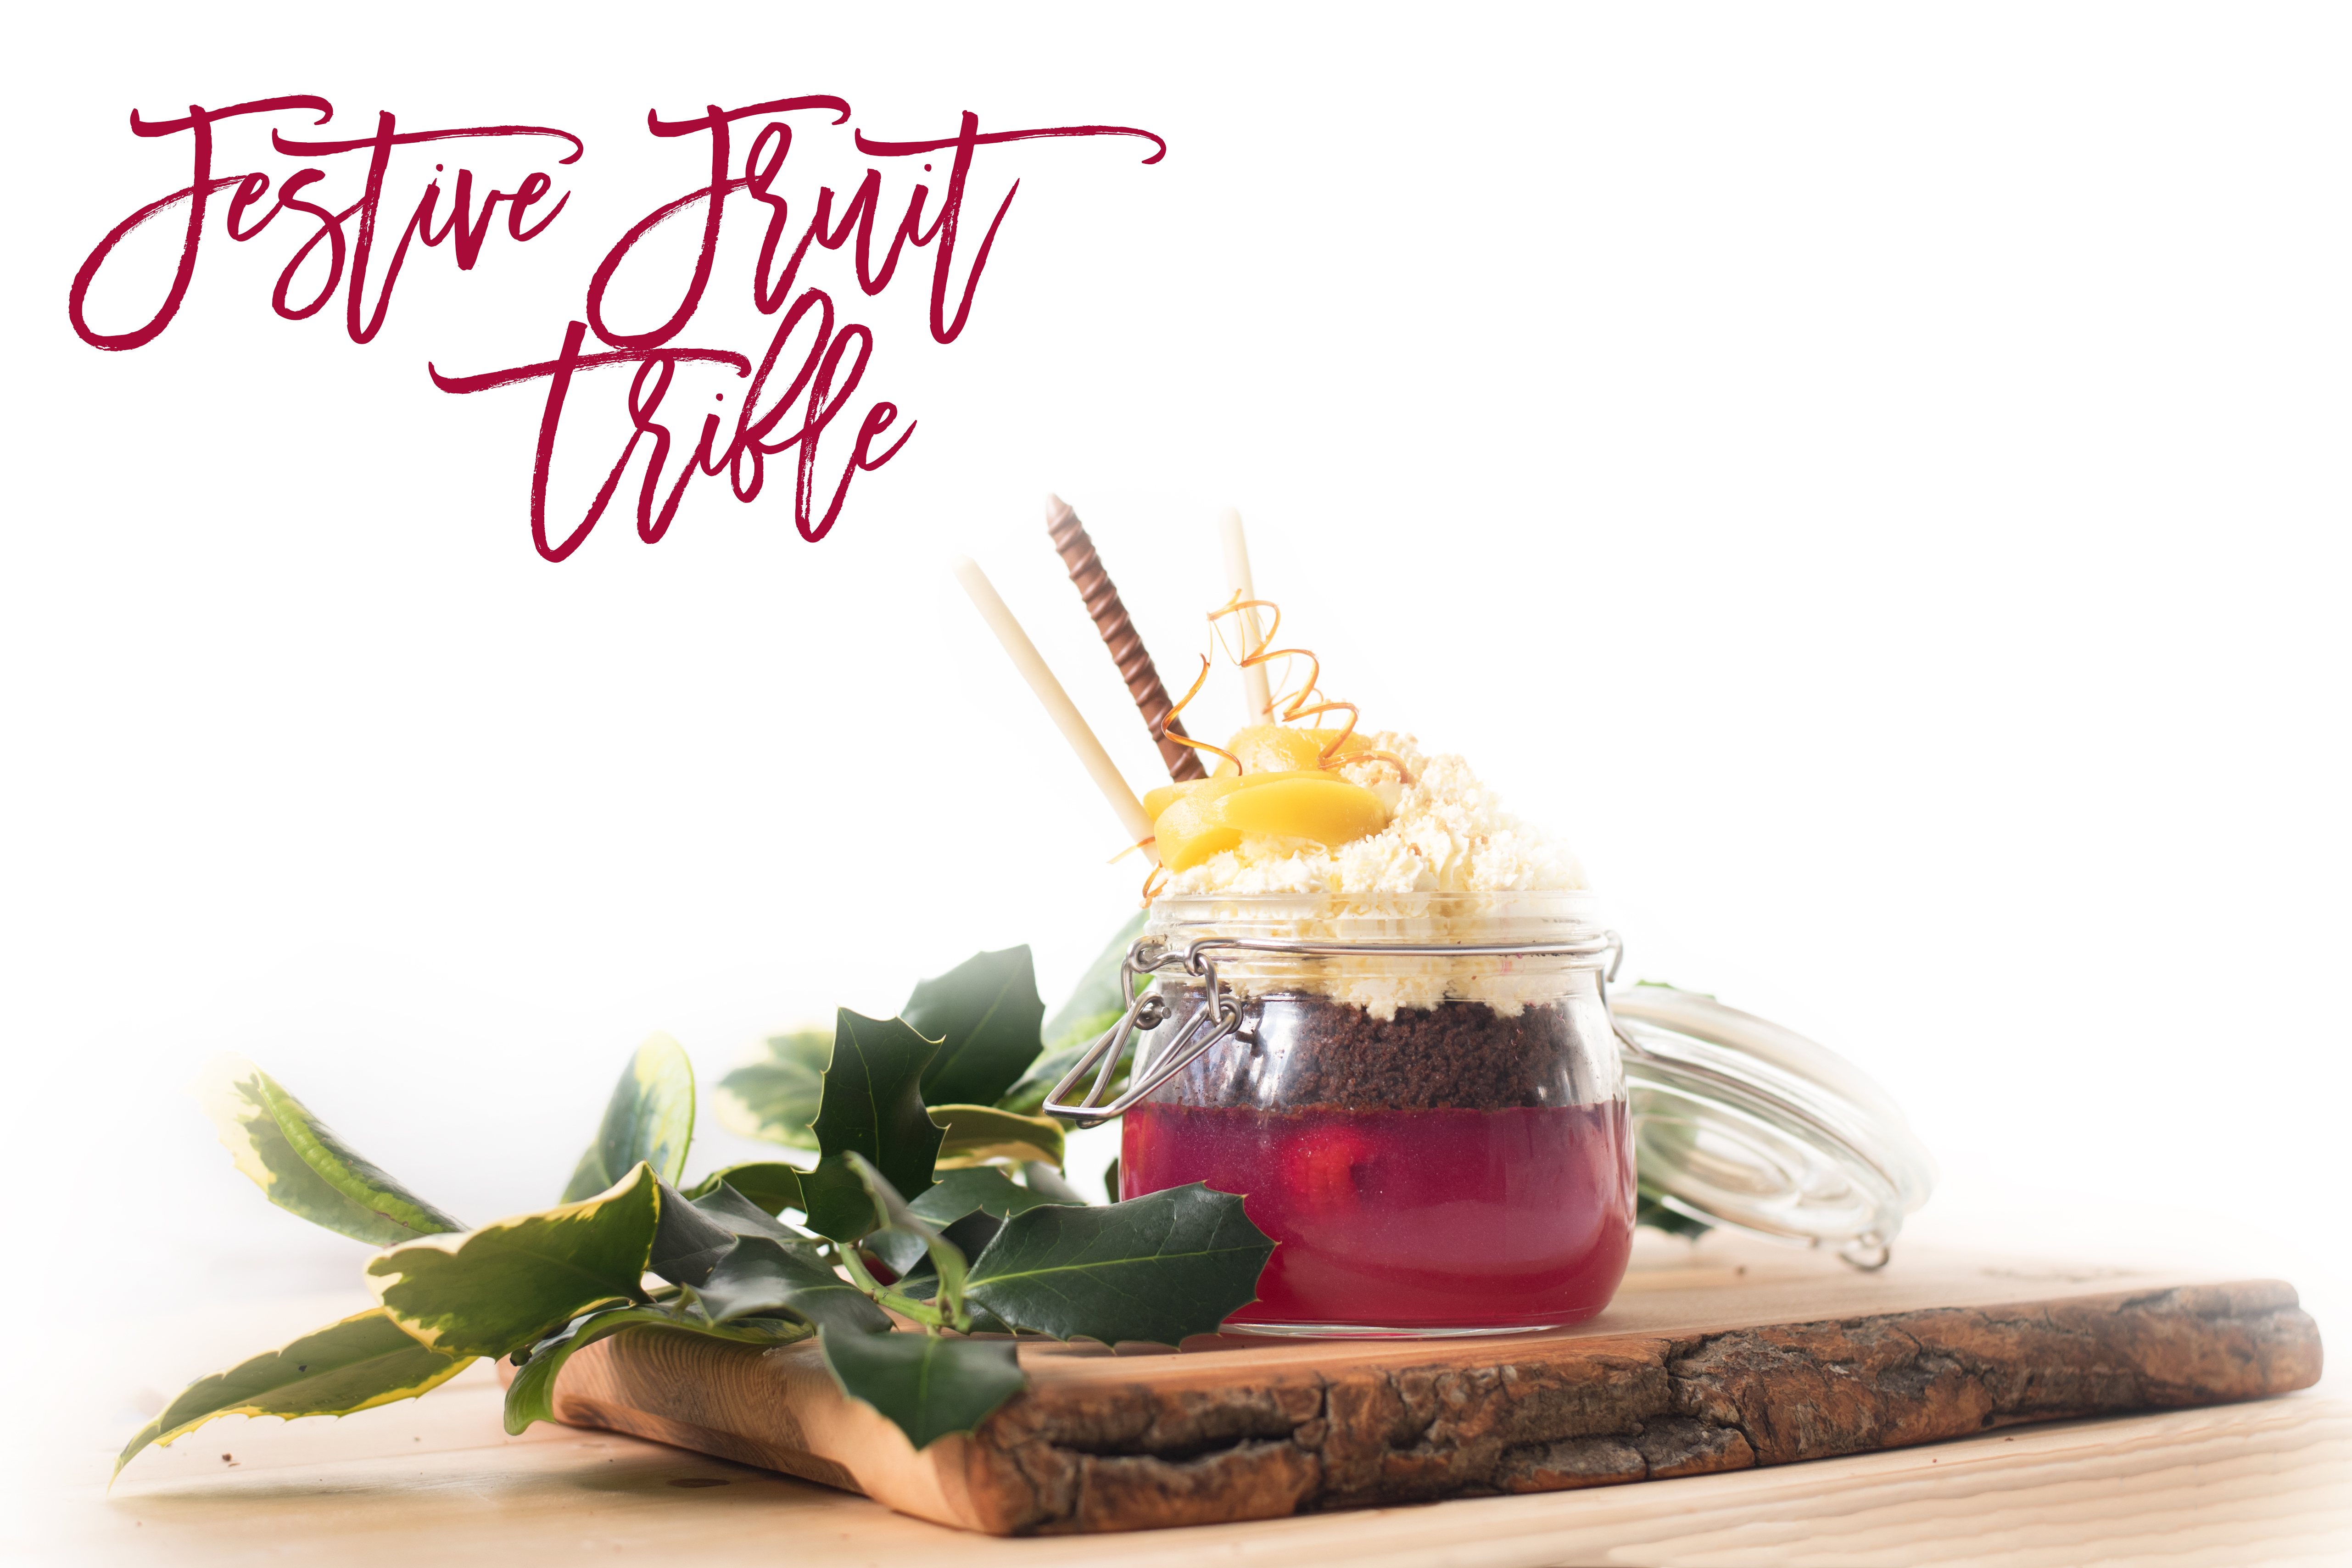 FESTIVE FRUIT TRIFLE: YESTOTHEBEST WITH DEL MONTE